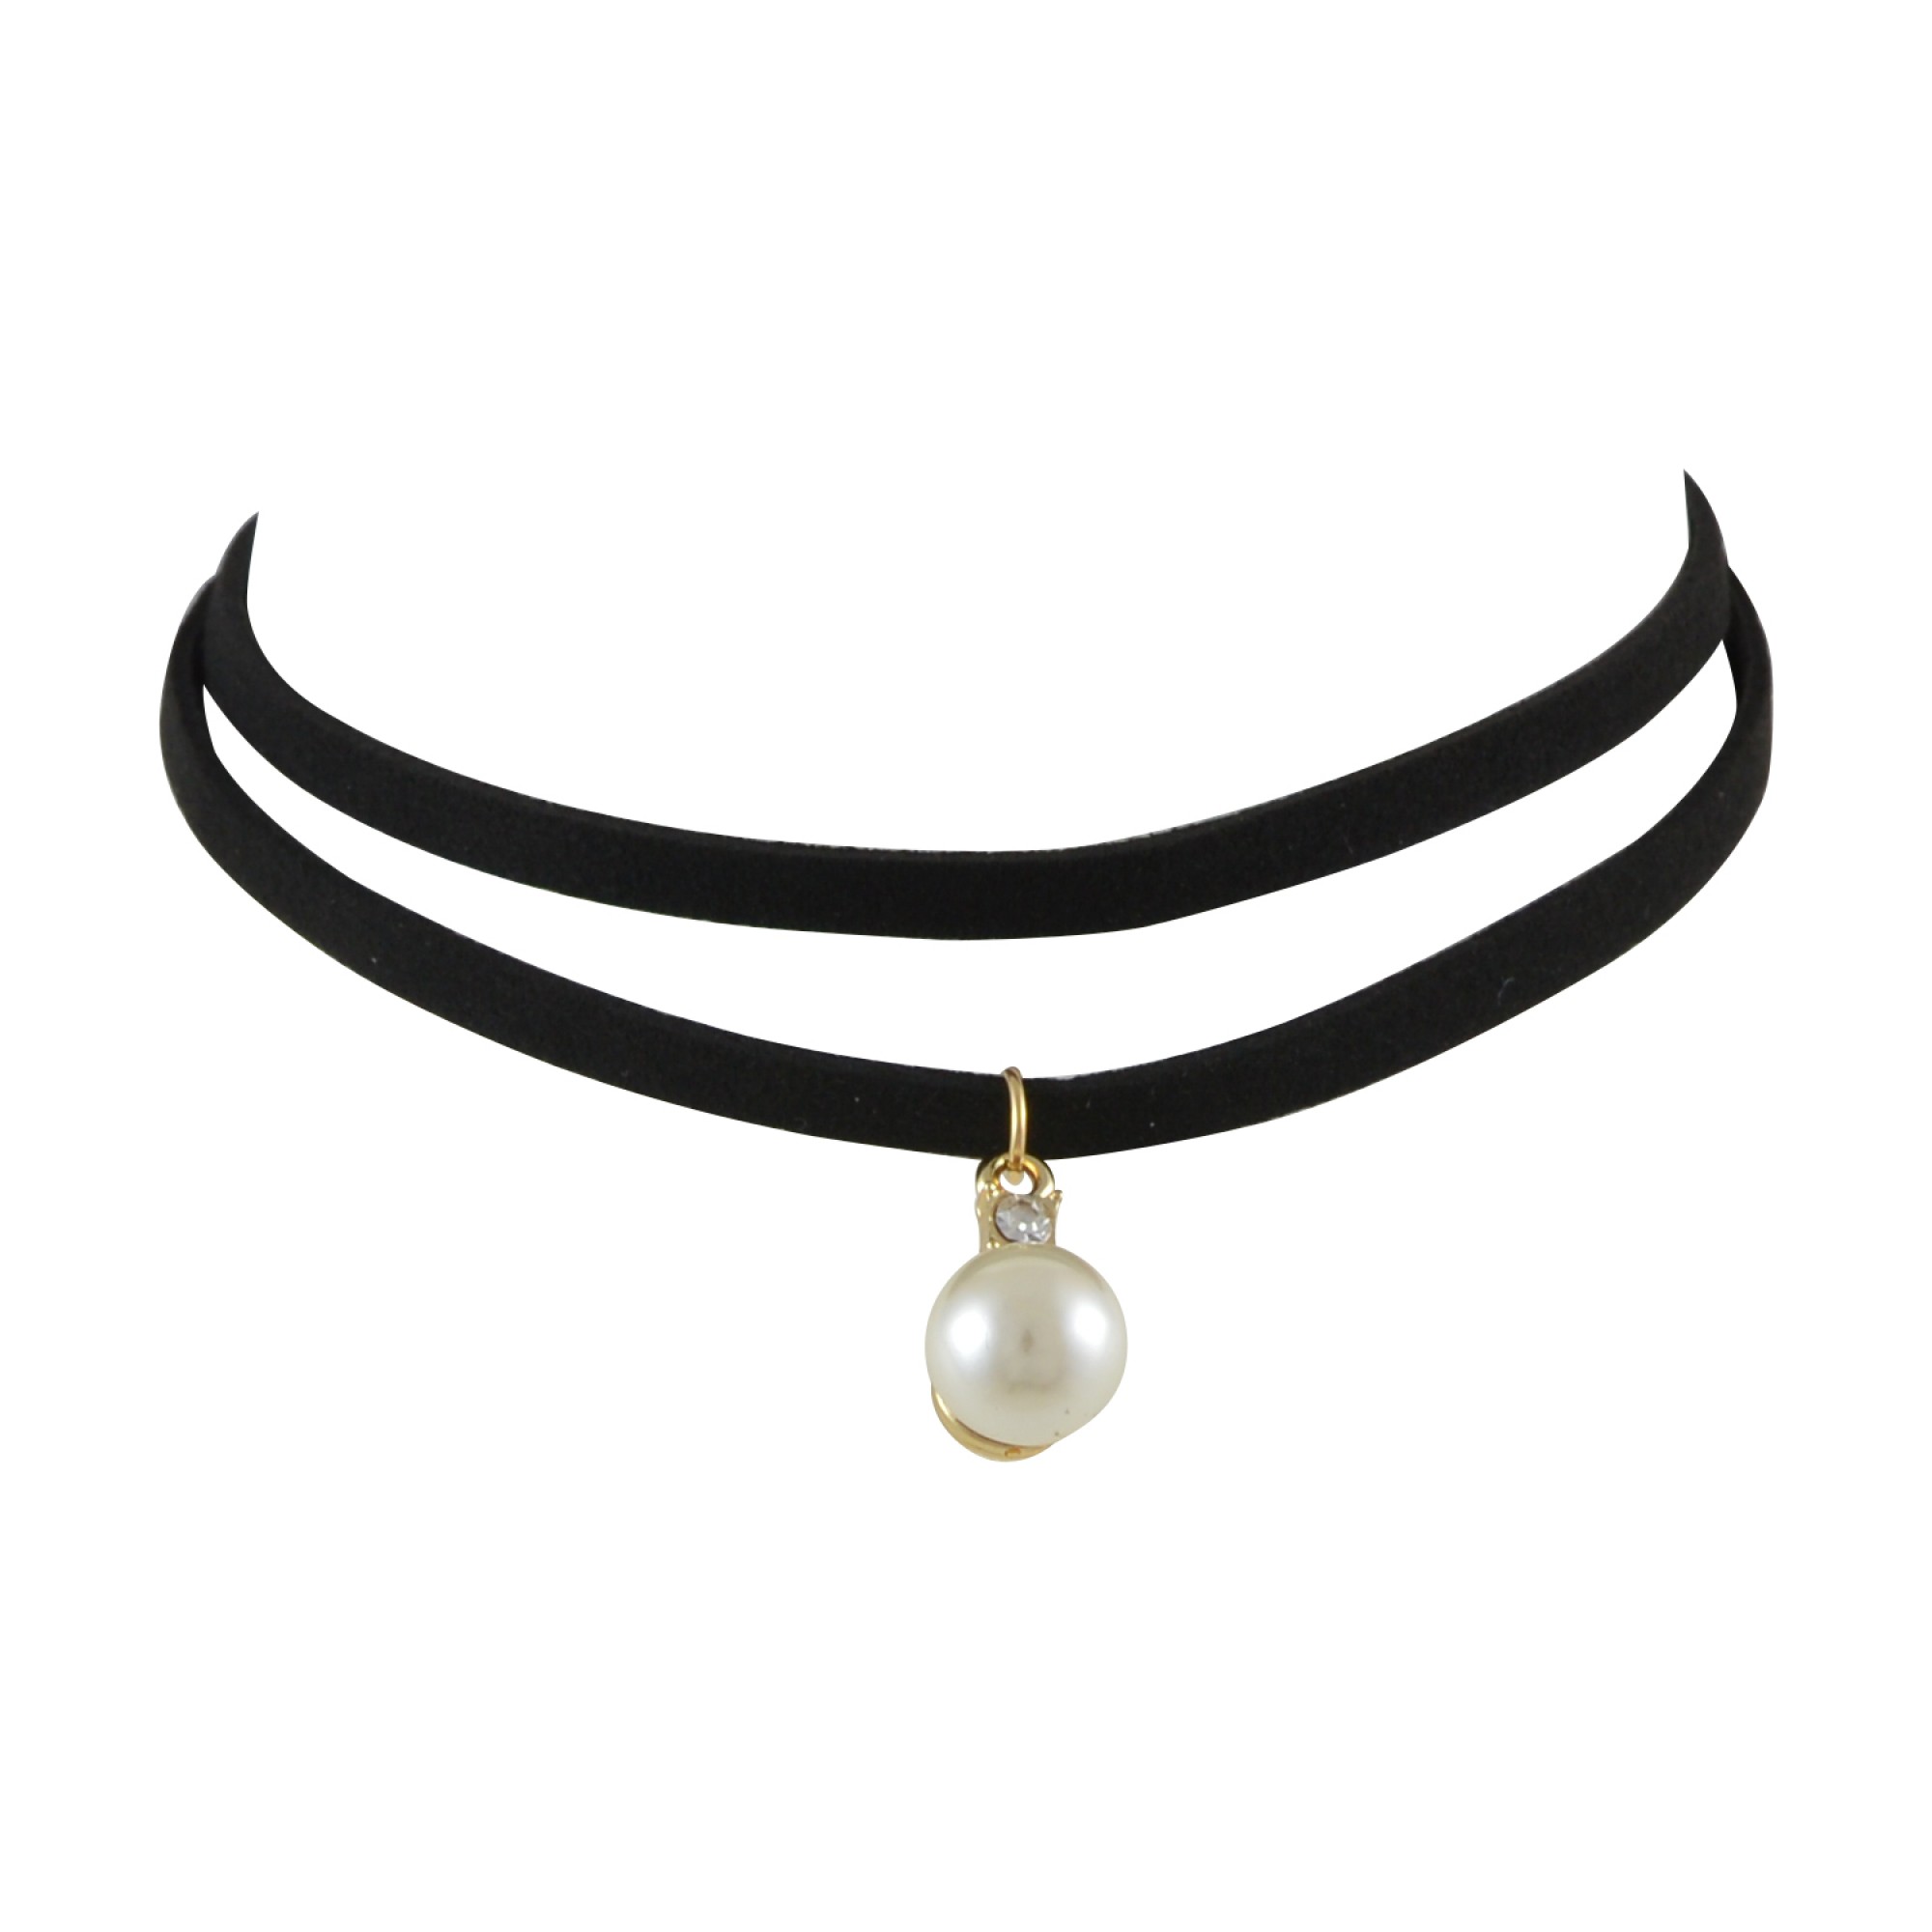 black necklace doublelayer peal charm gothic choker necklace for women - black HLZYNIE